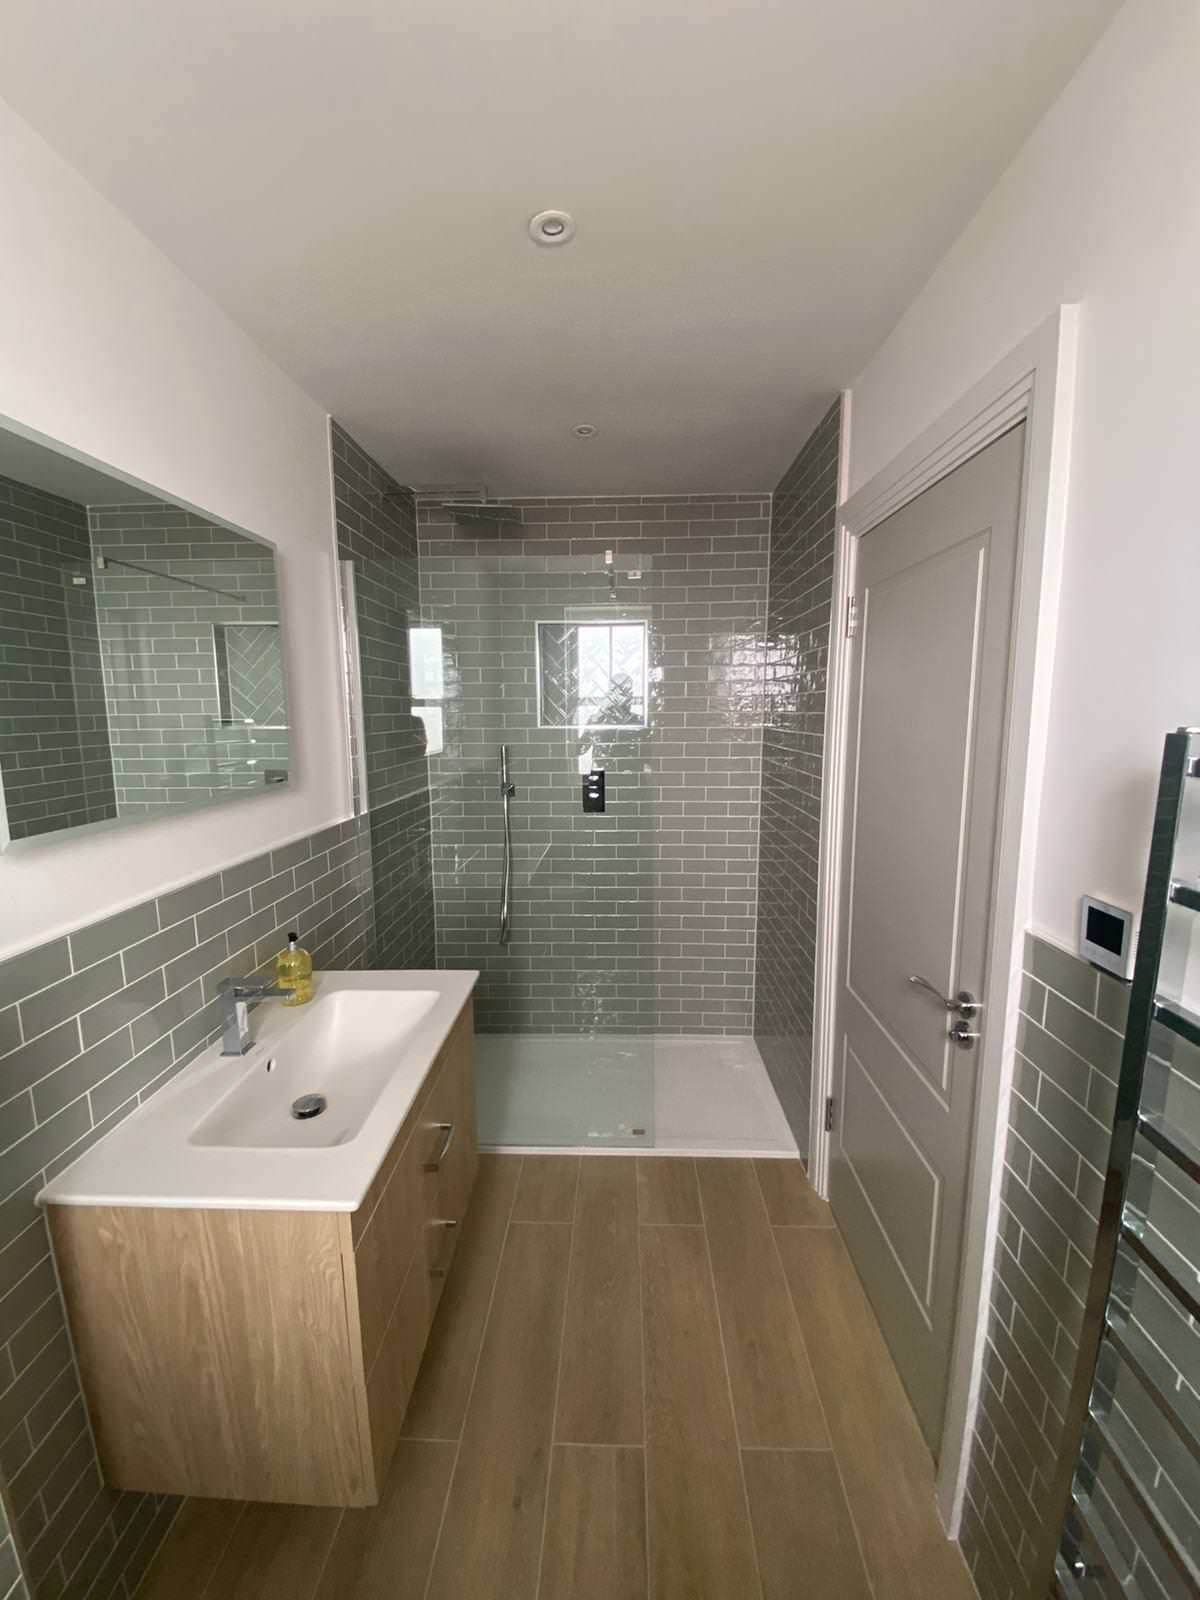 Four Luxury Bathrooms and a Cloakroom for Zafiro Homes LTD